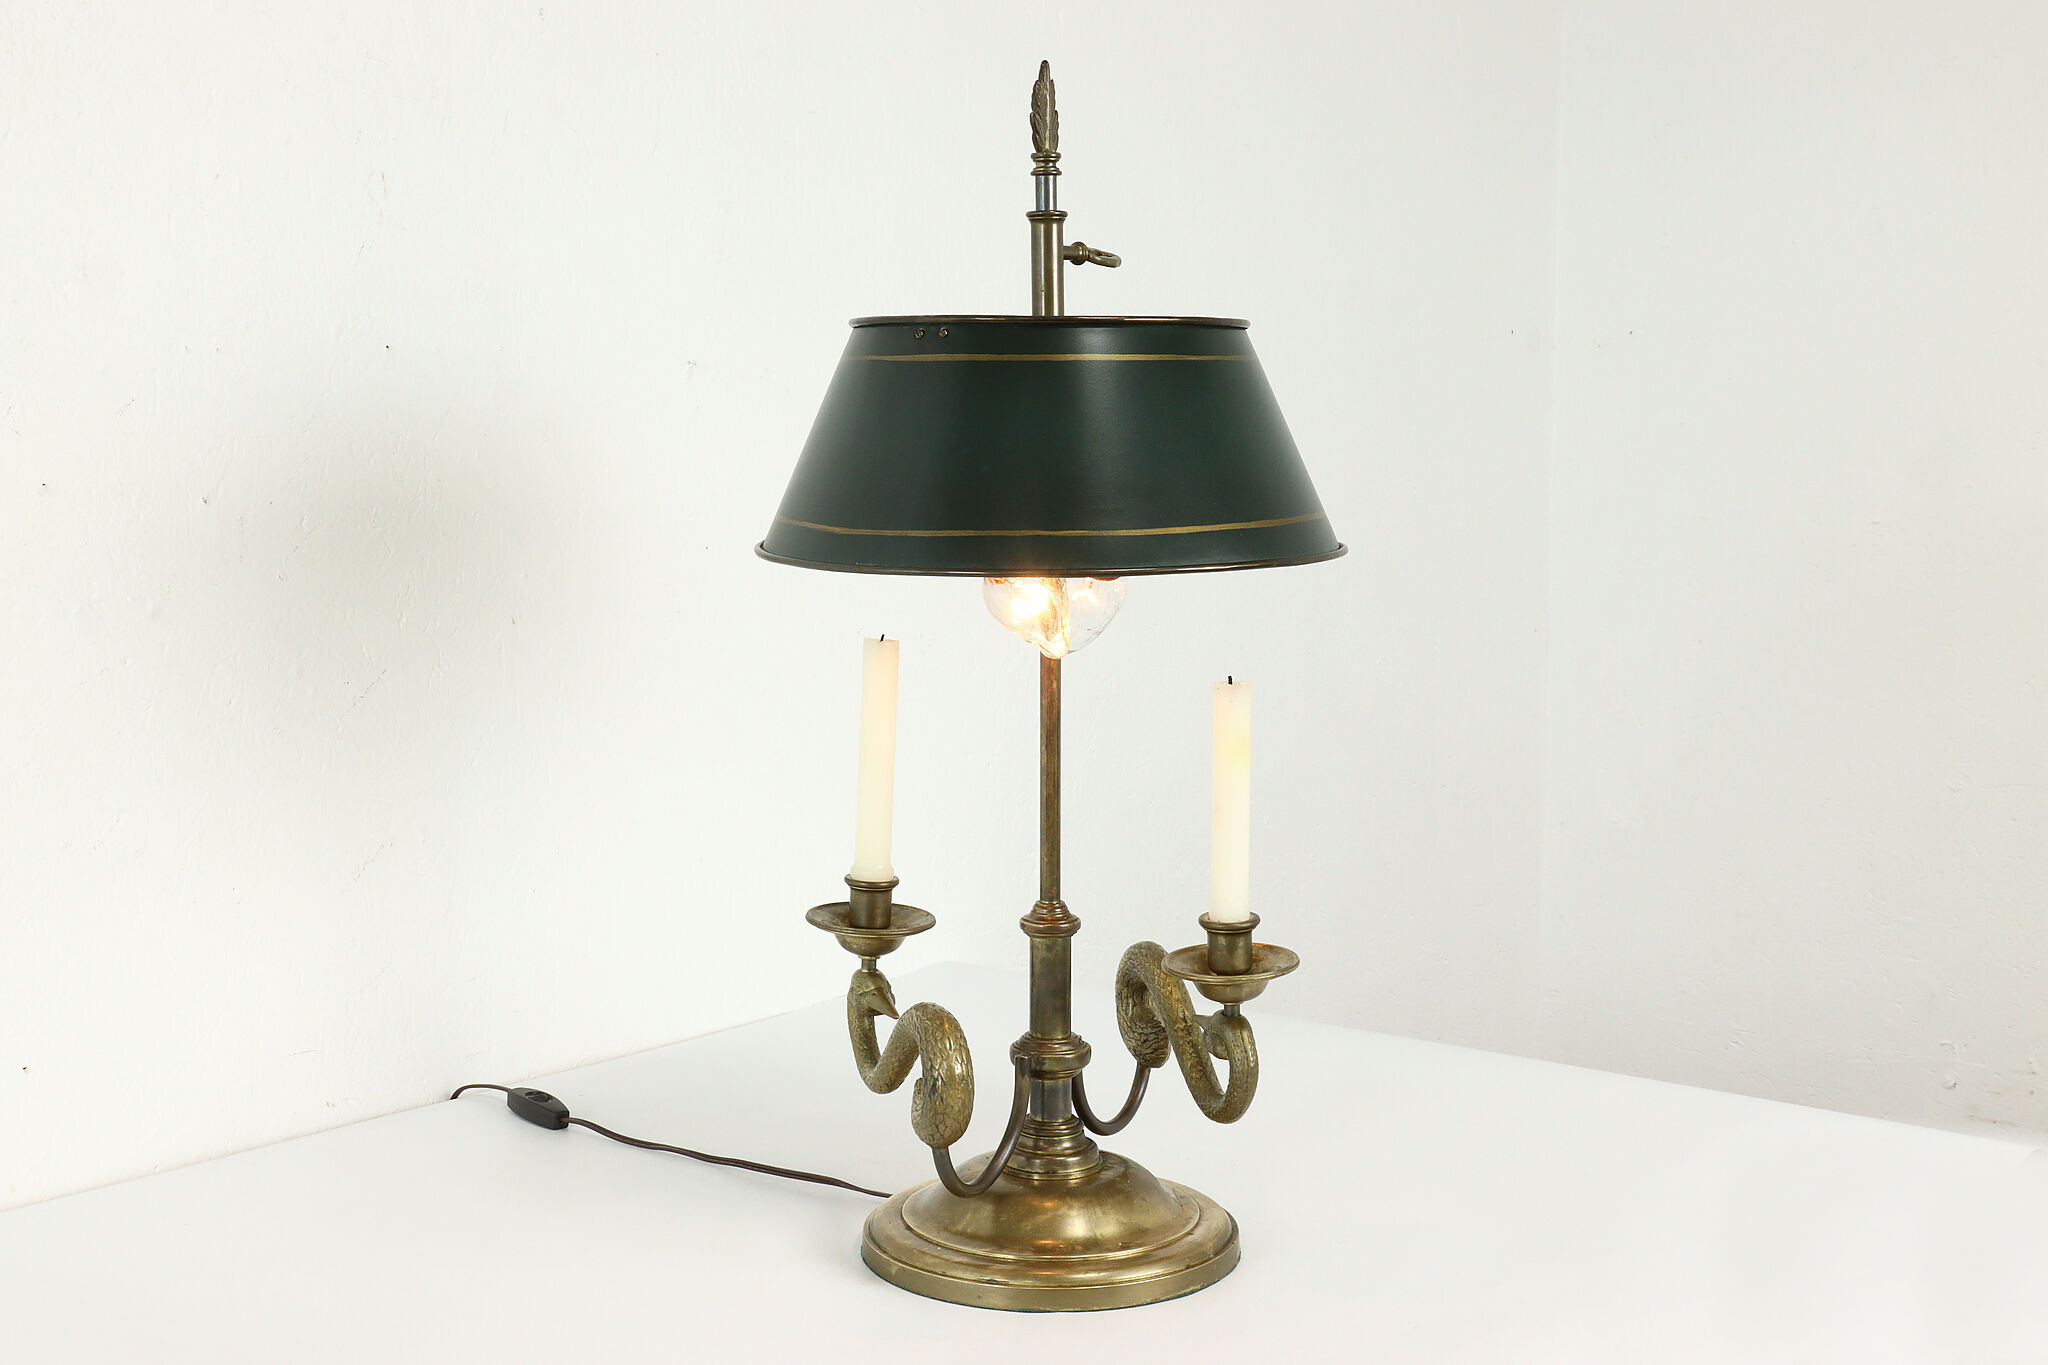 Swan Bouillotte Vintage Solid Brass Lamp, Tole Painted Shade, Chapman